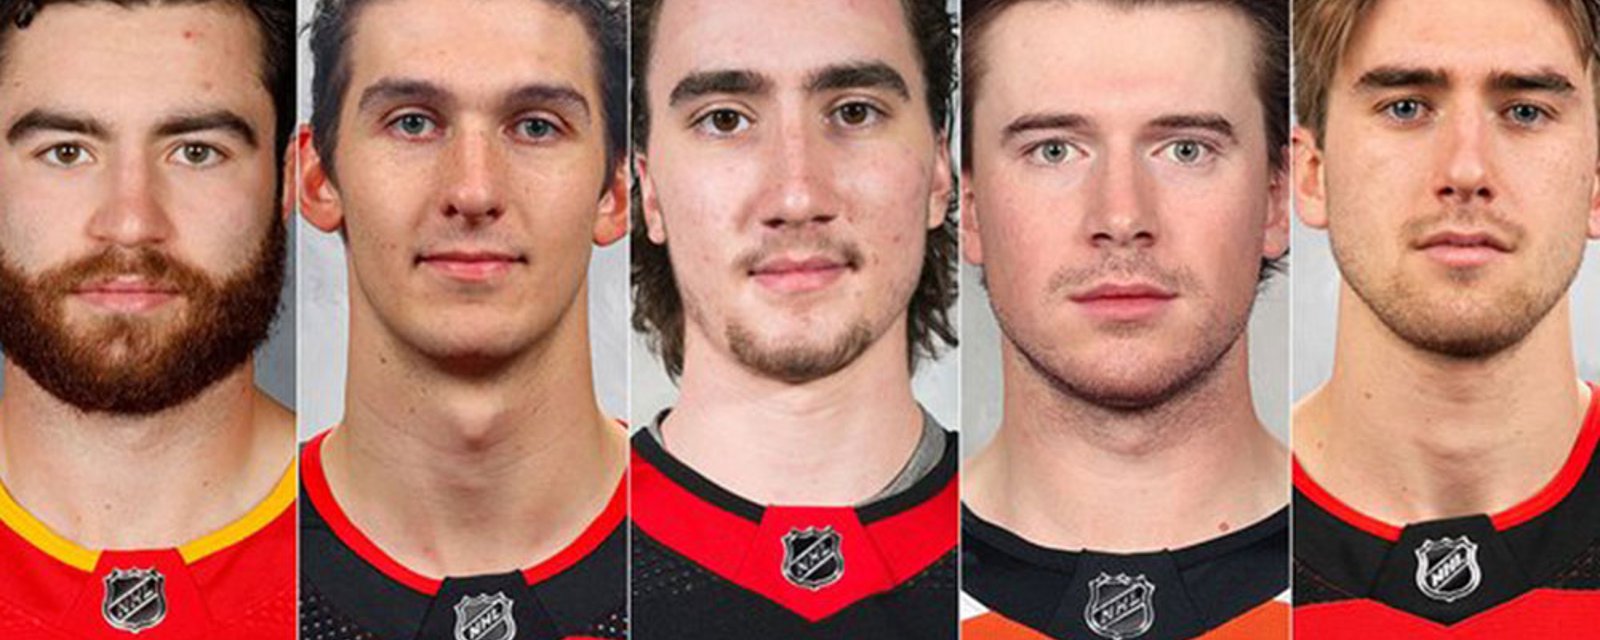 London Police officially identify the 4 NHL players charged in 2018 World Juniors investigation